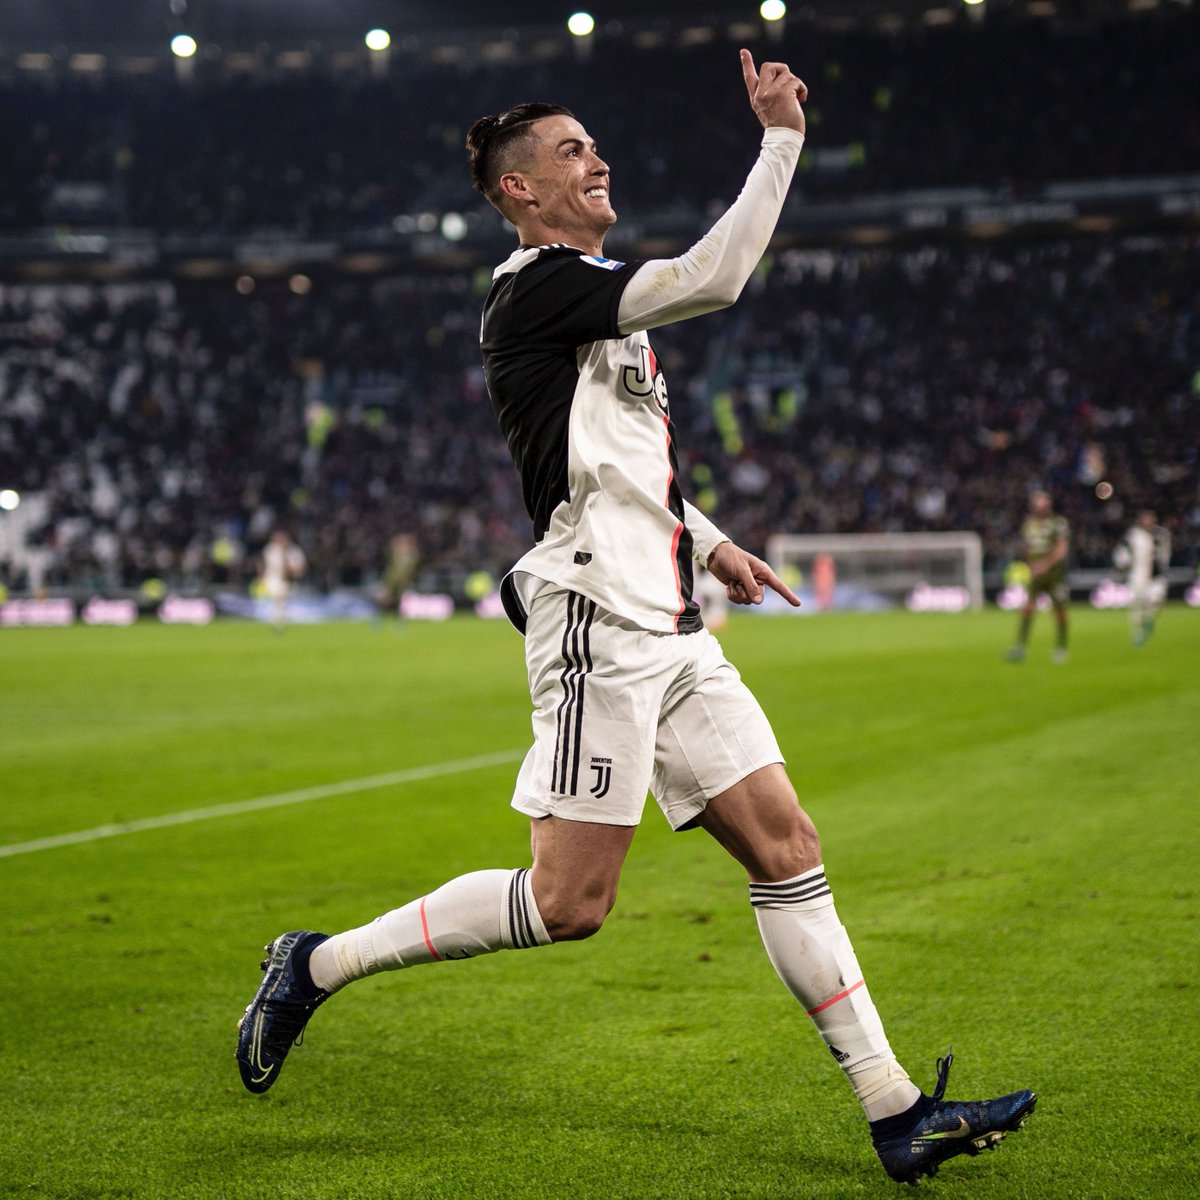 Goal On Twitter Cristiano Ronaldo I Don T See Anyone Better Than Me No Player Does Things That I Cannot Do Myself But I See Things Others Can T Do There S No More